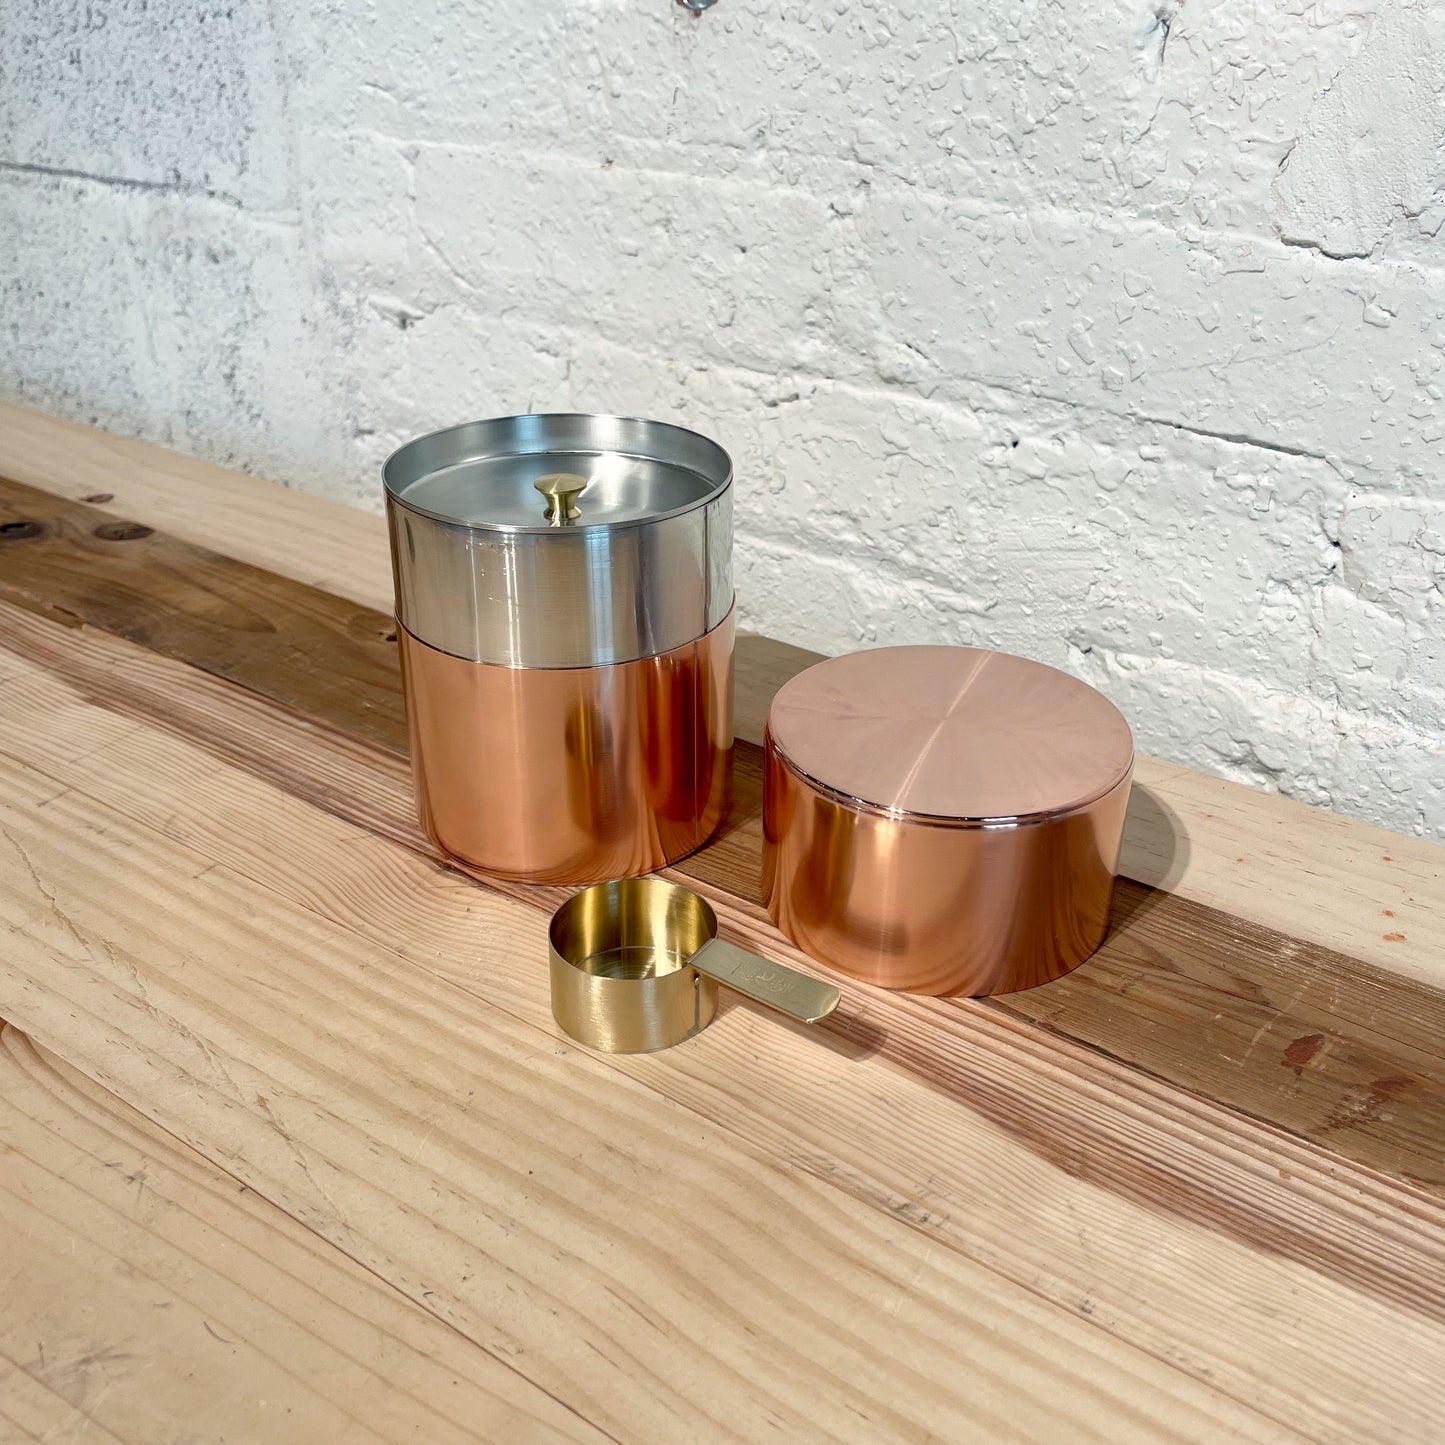 Copper Tea Caddy 200g
with coffee spoon